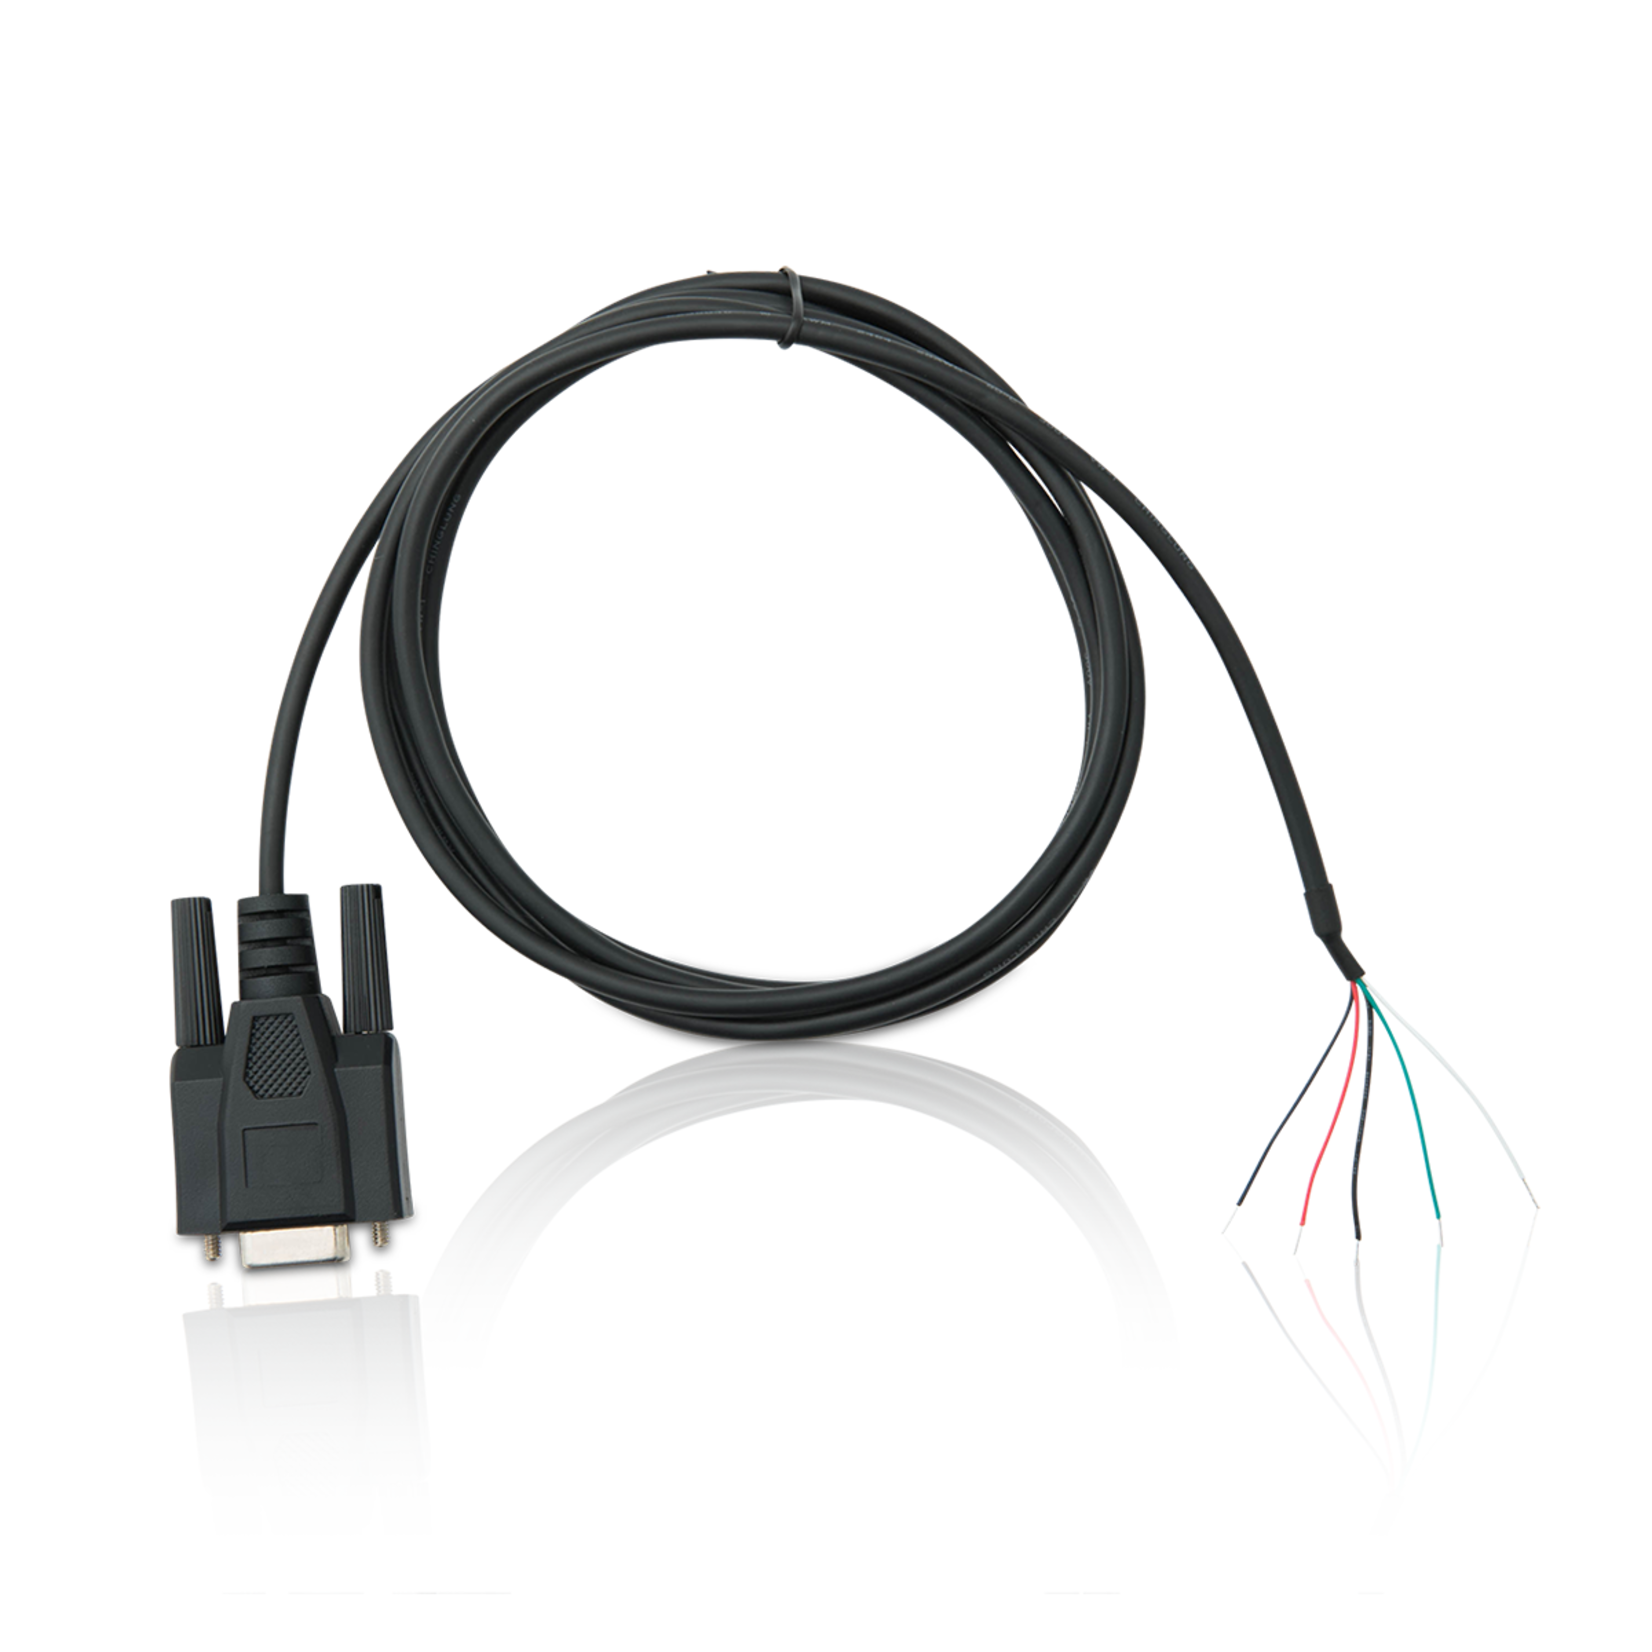 Actisense 9 pin, D type moulded cable assembly (female)